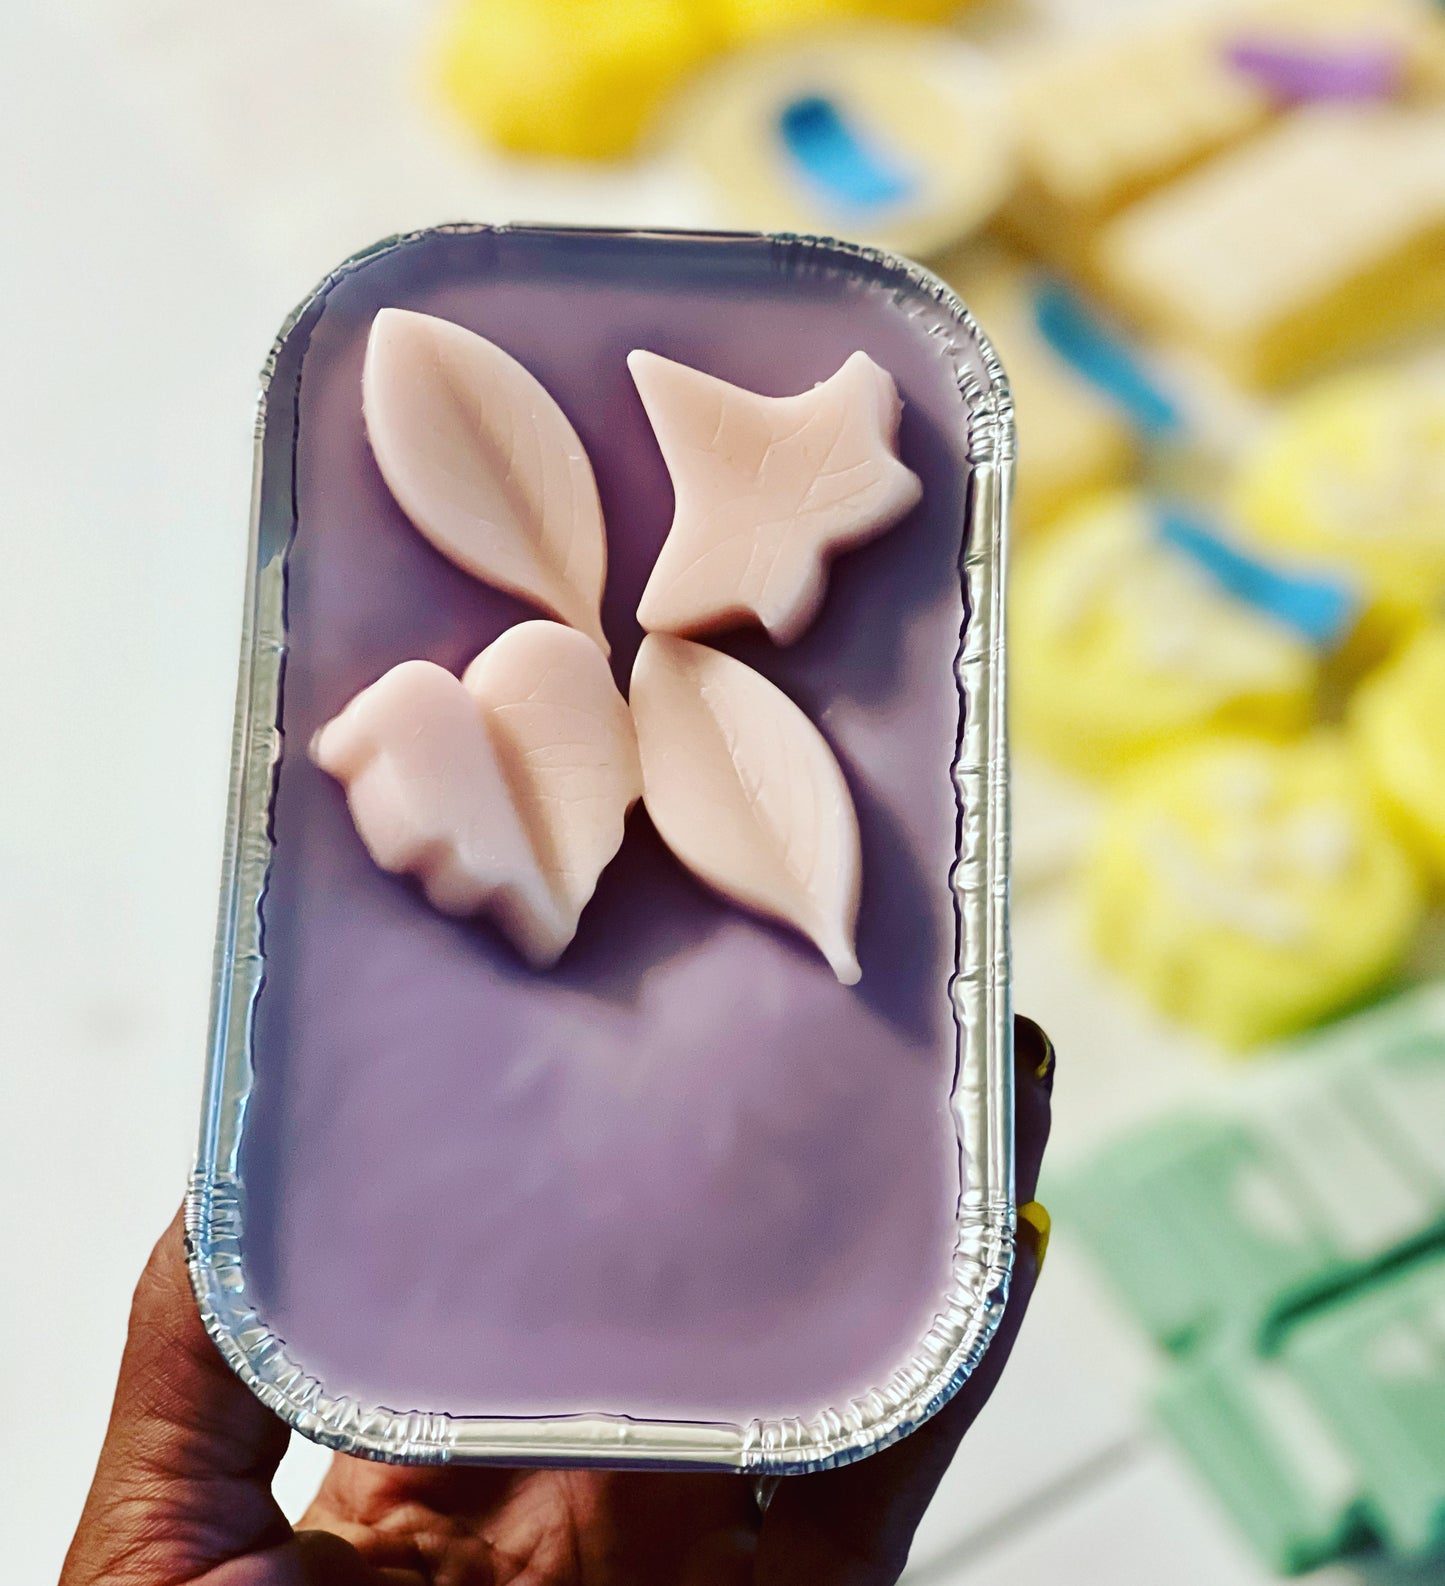 CUSTOM CREATE YOUR OWN BLEND (CYO) SHAPES, PIES & LOAVES WAX MELTS